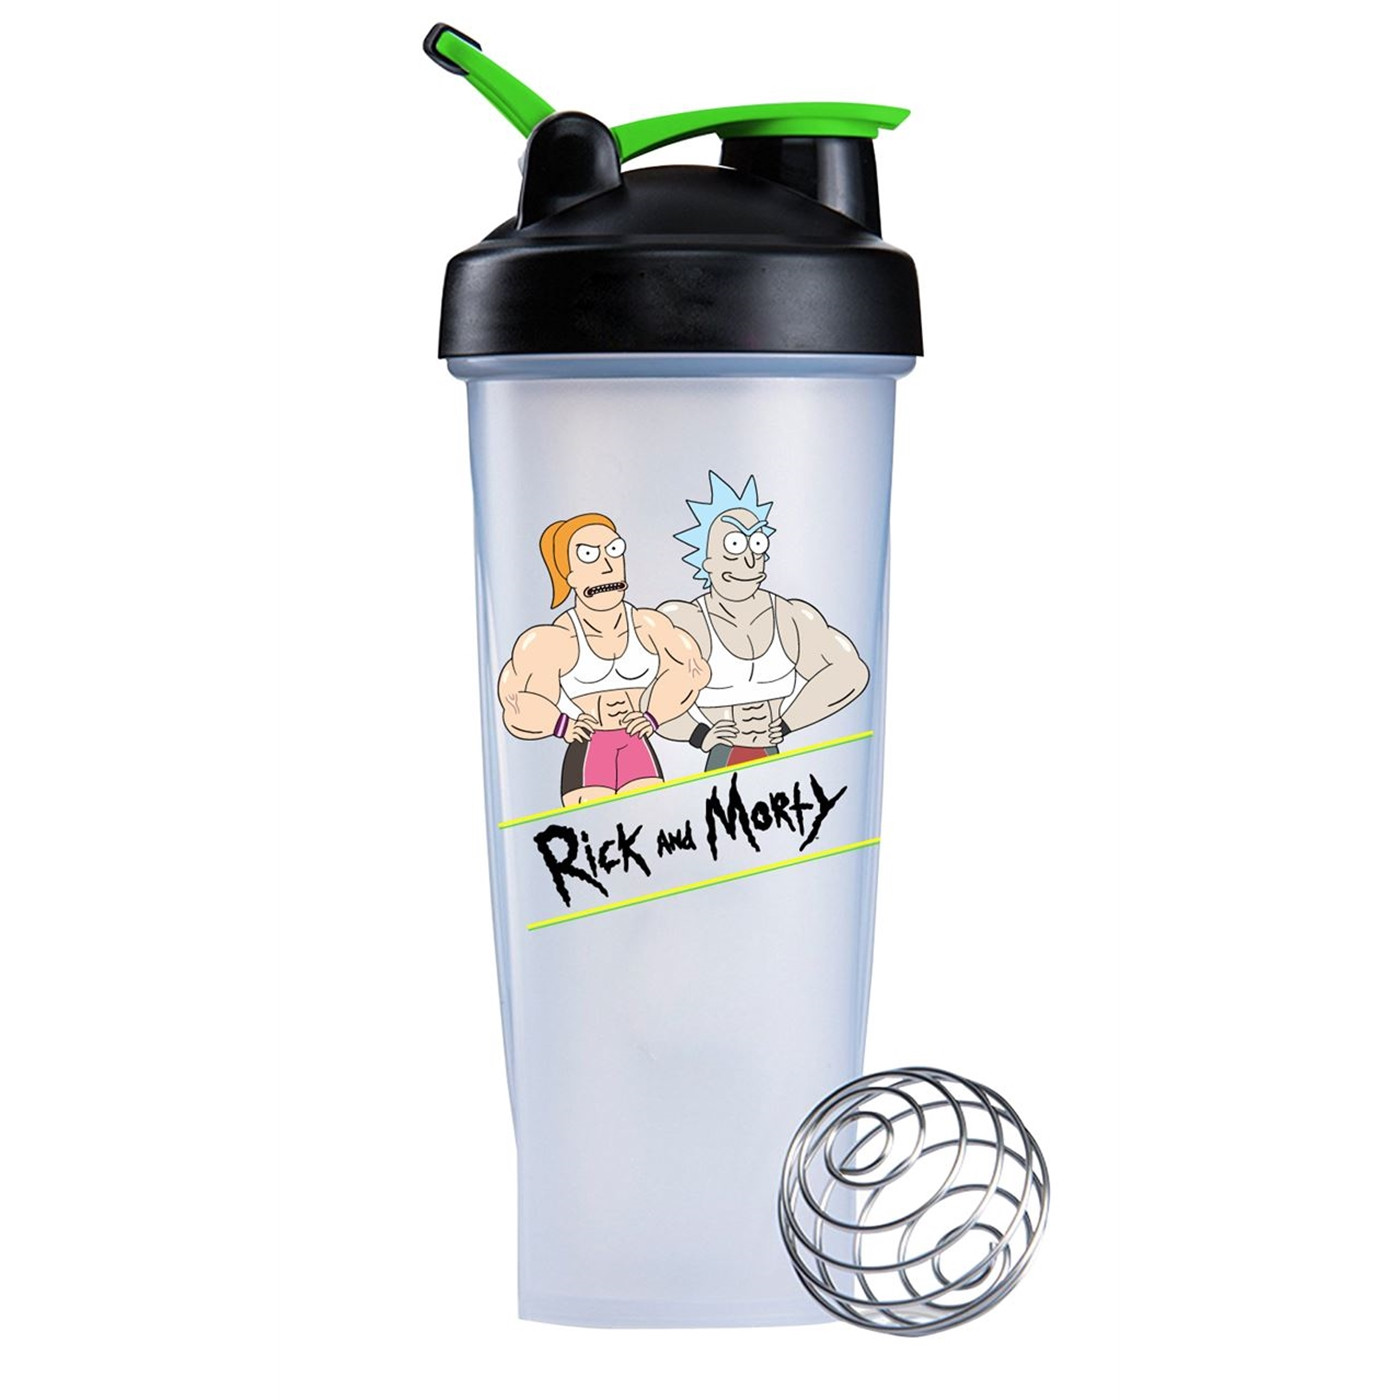 Rick and Morty Ripped Blender Bottle